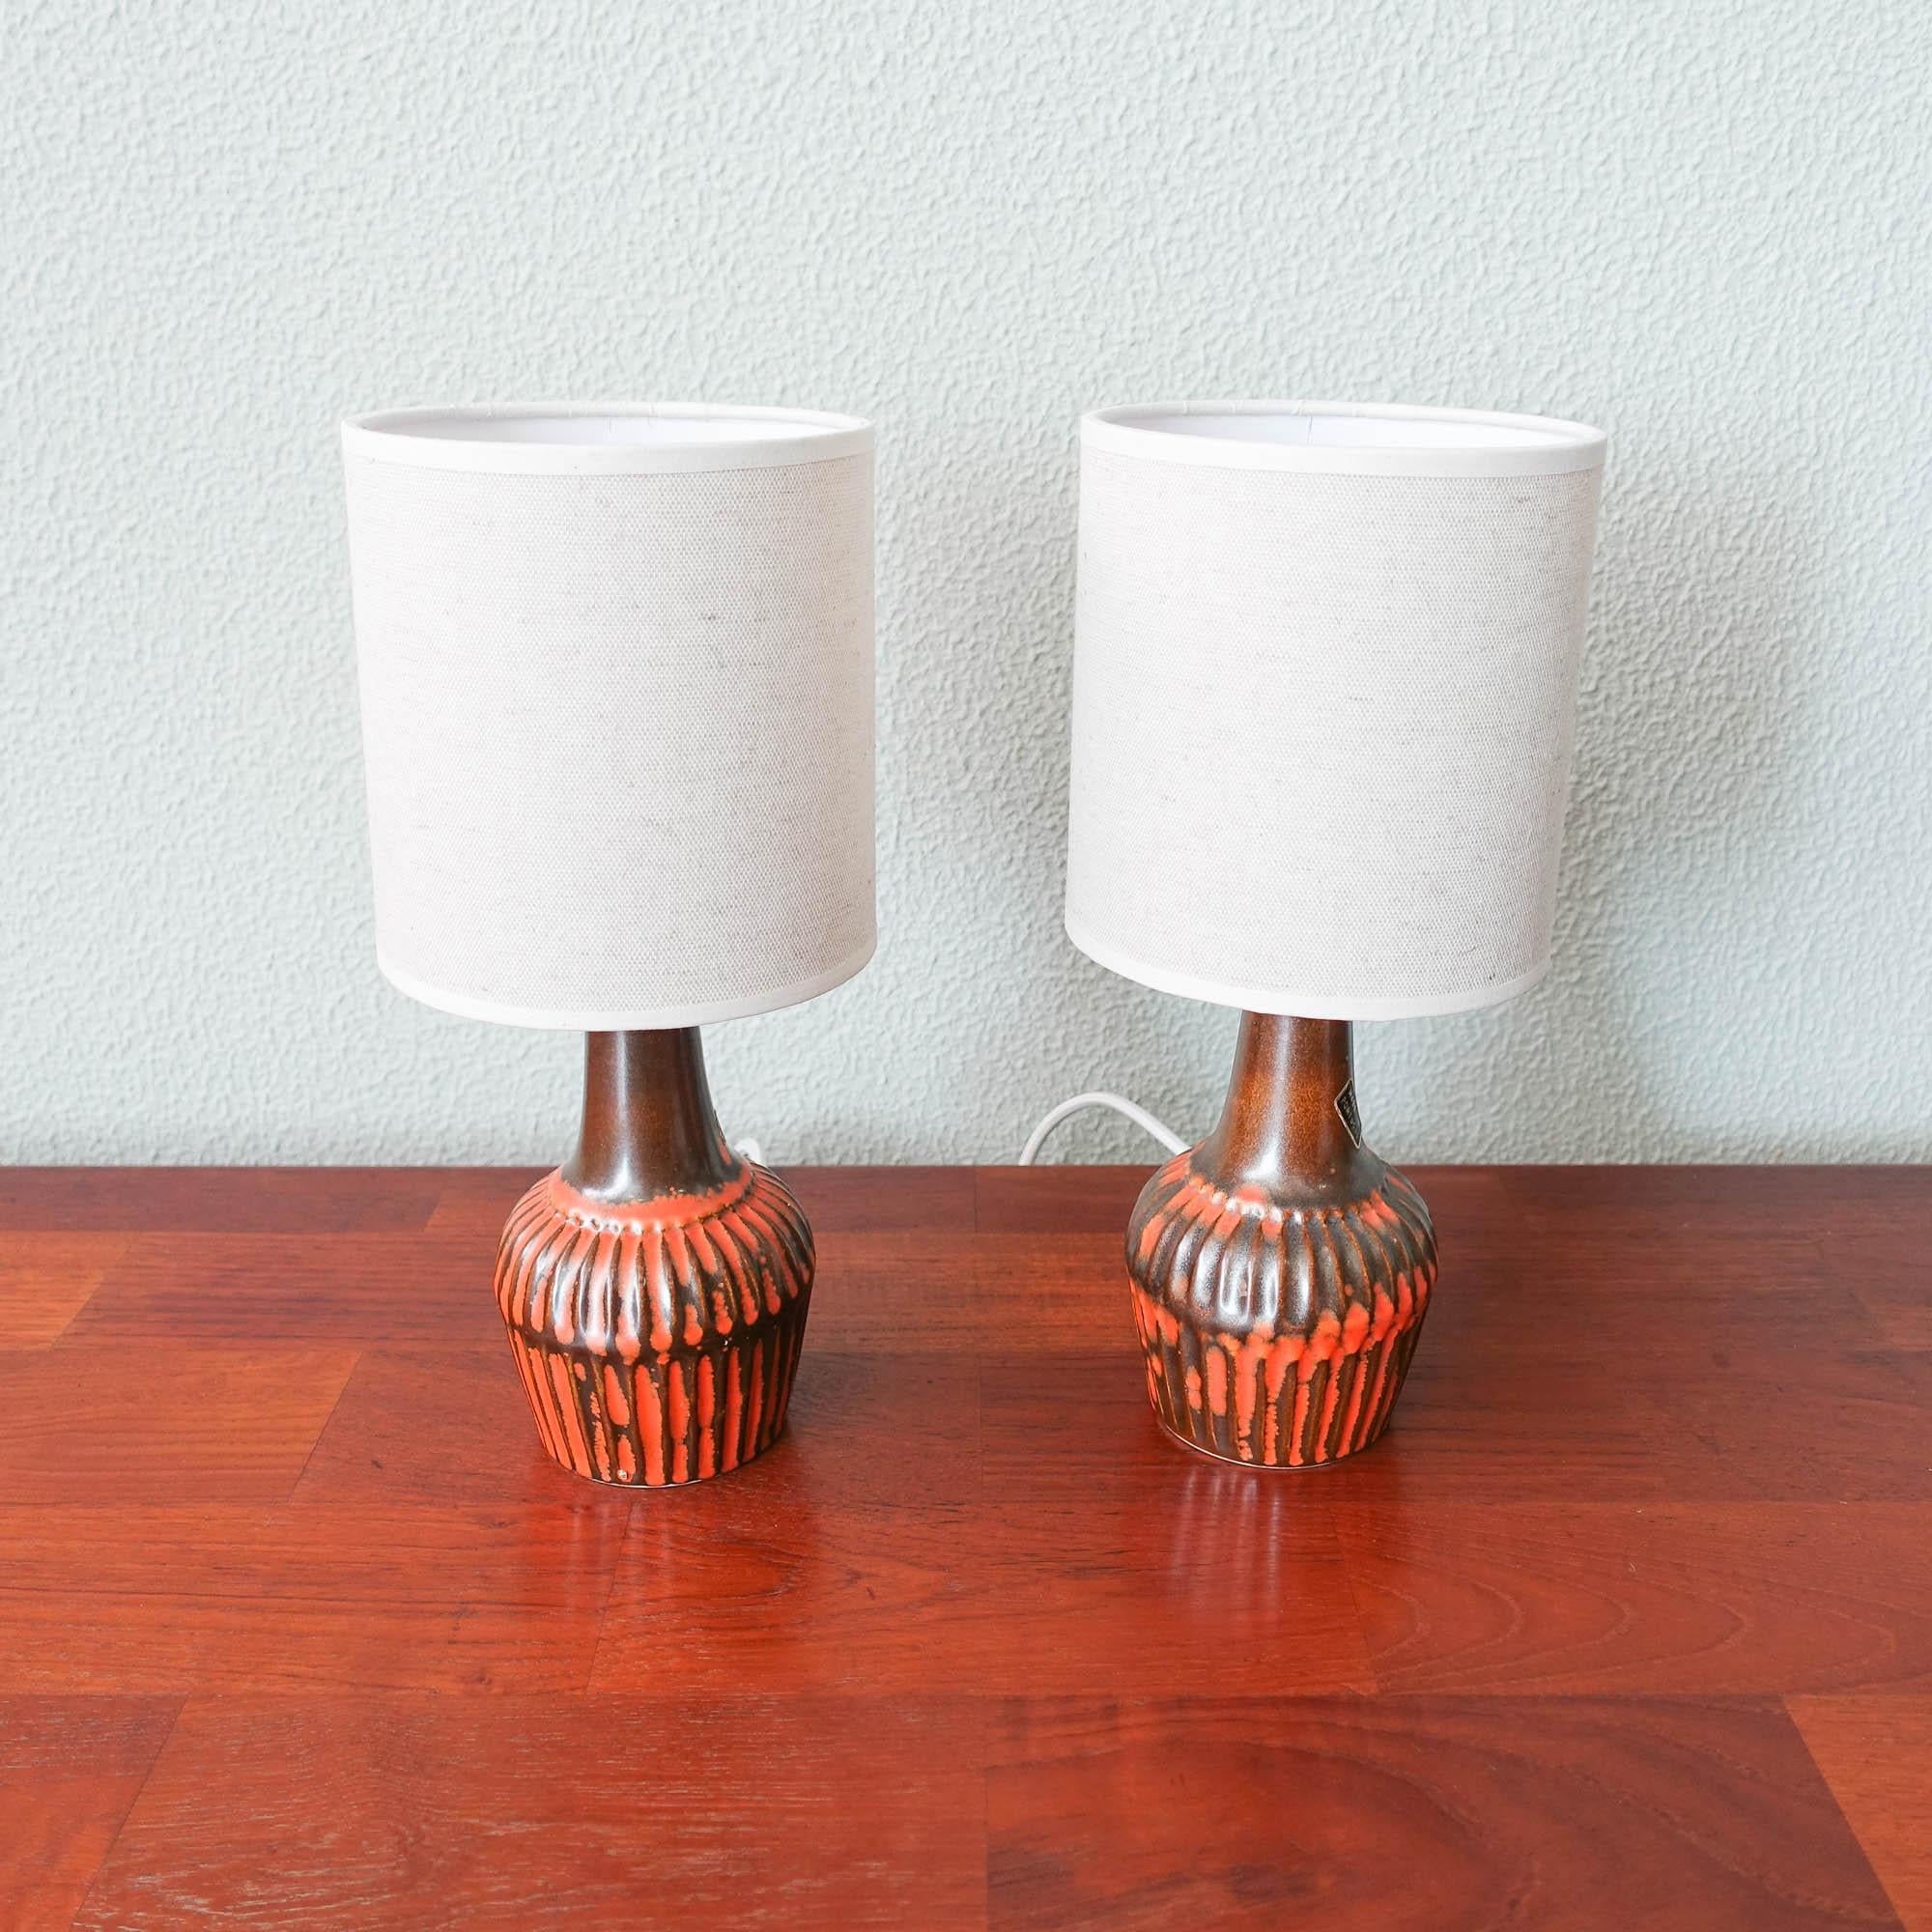 Pair of Brown and Orange Ceramic Table Lamps by Secla, 1960s For Sale 10